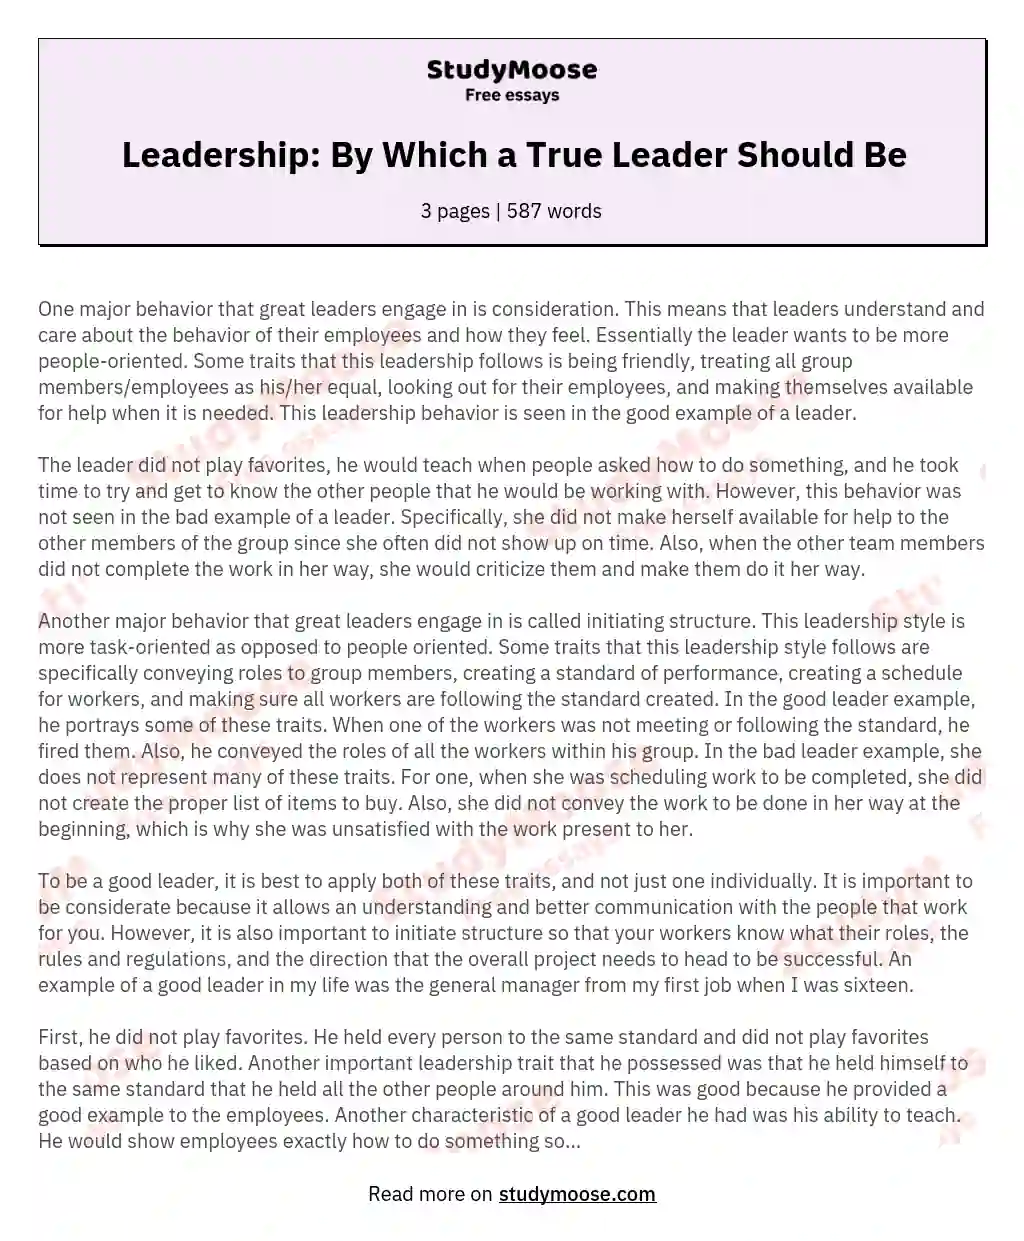 Leadership: By Which a True Leader Should Be essay